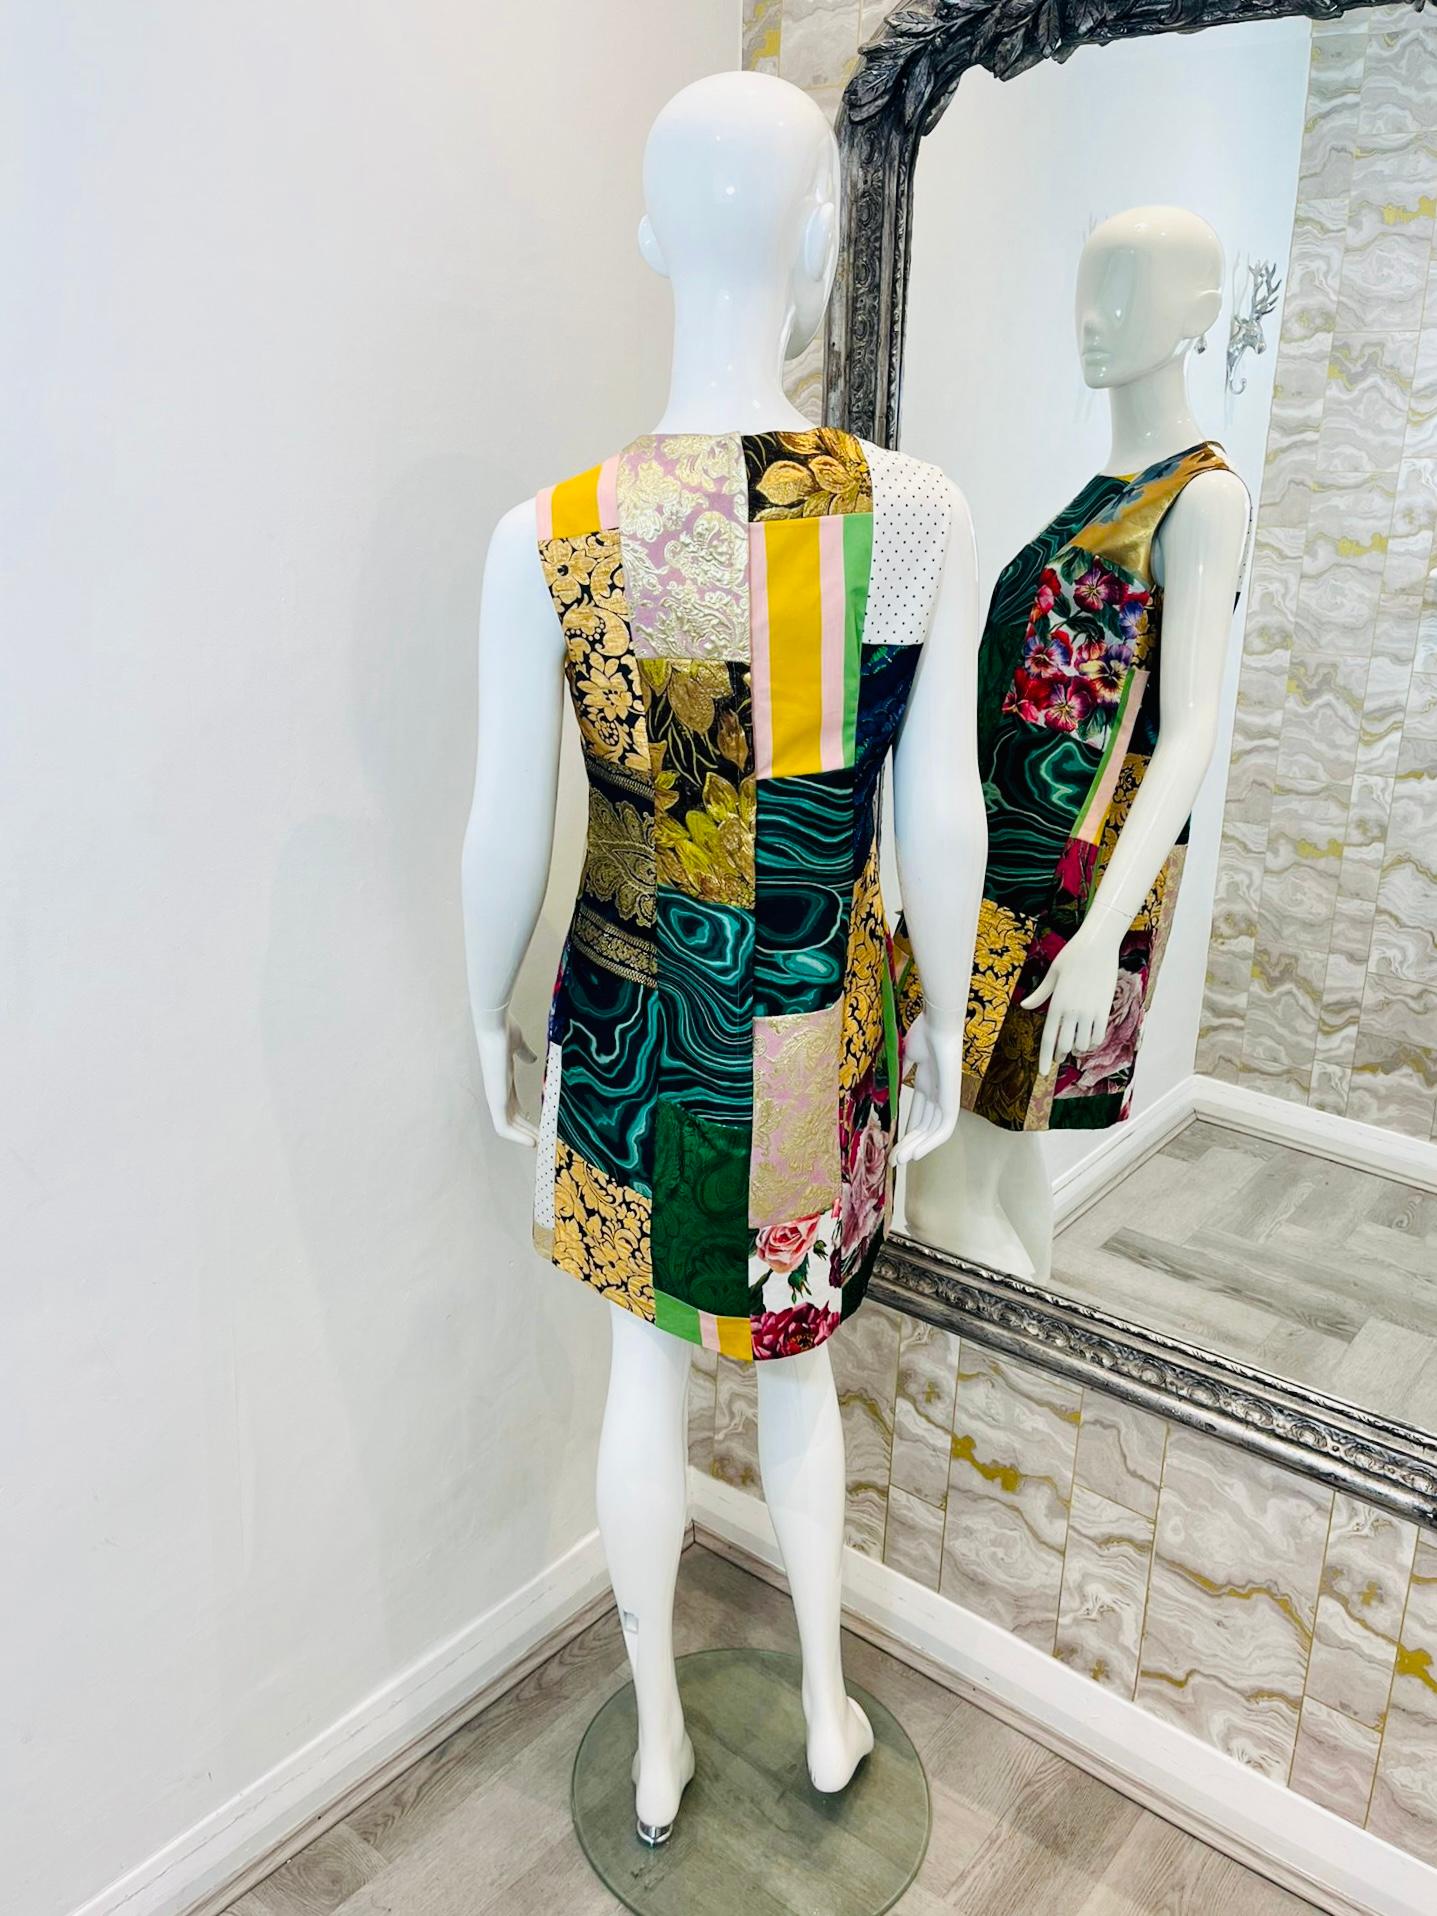 Dolce & Gabbana Brocade & Lame Patchwork Dress In Excellent Condition For Sale In London, GB